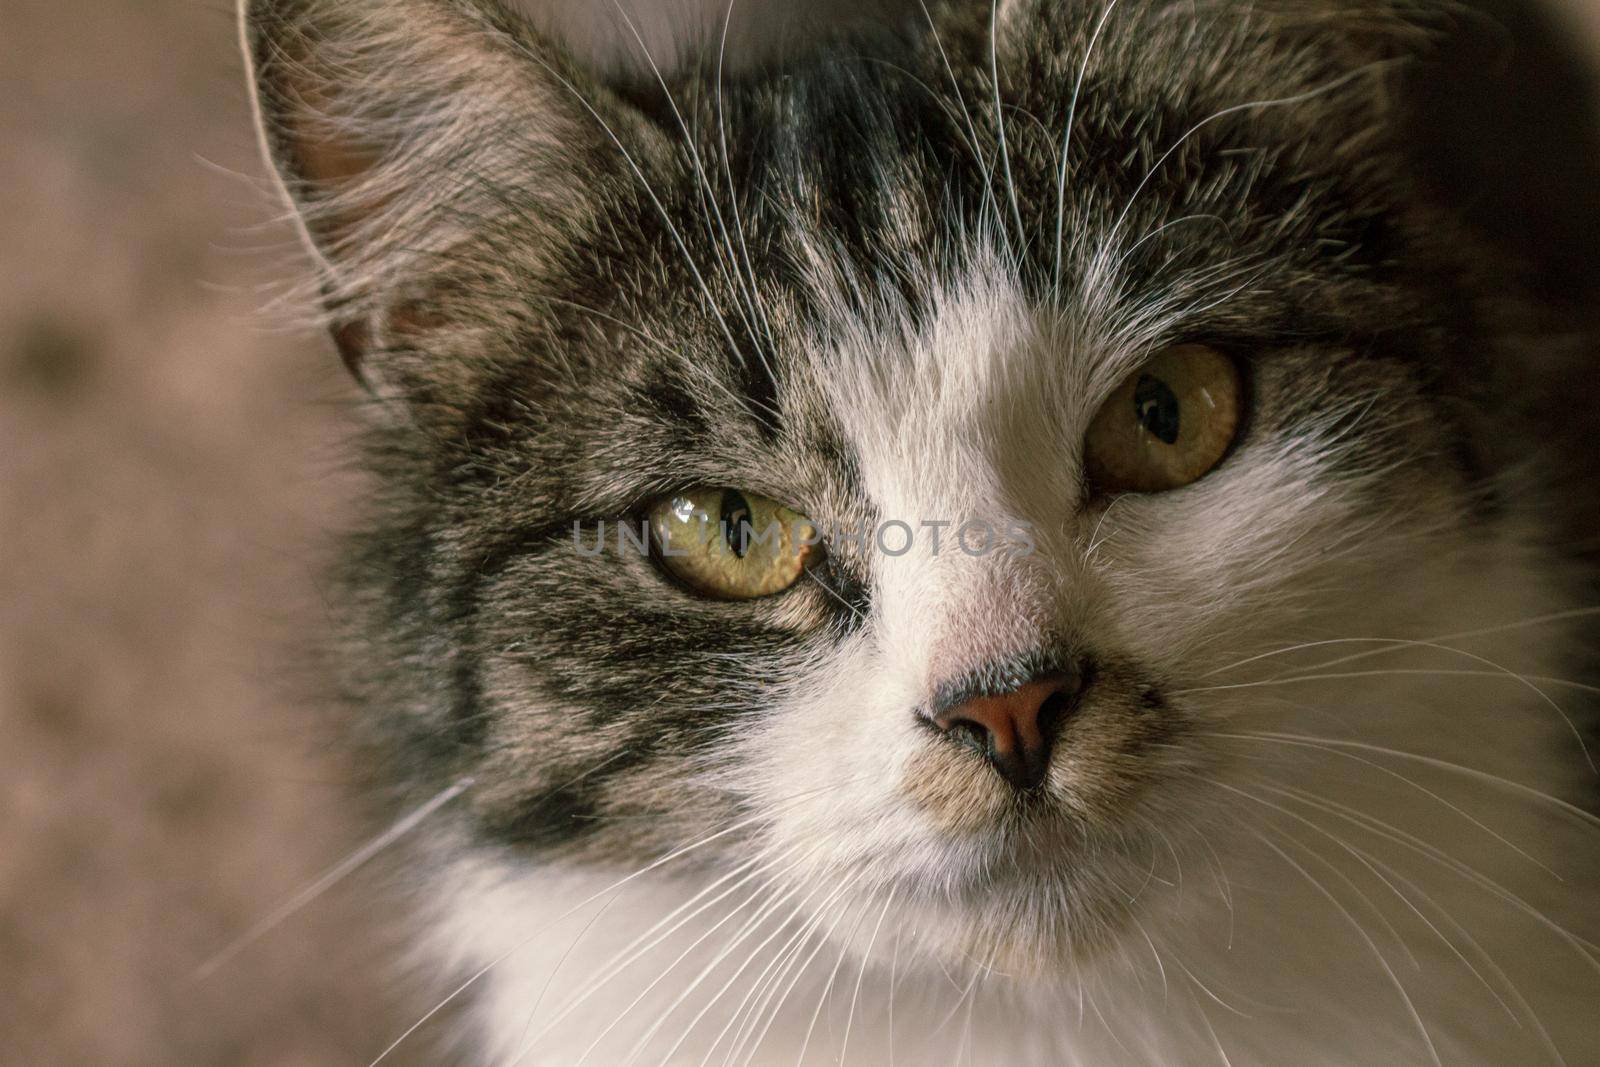 Mixed species fluffy cat portrait by scudrinja